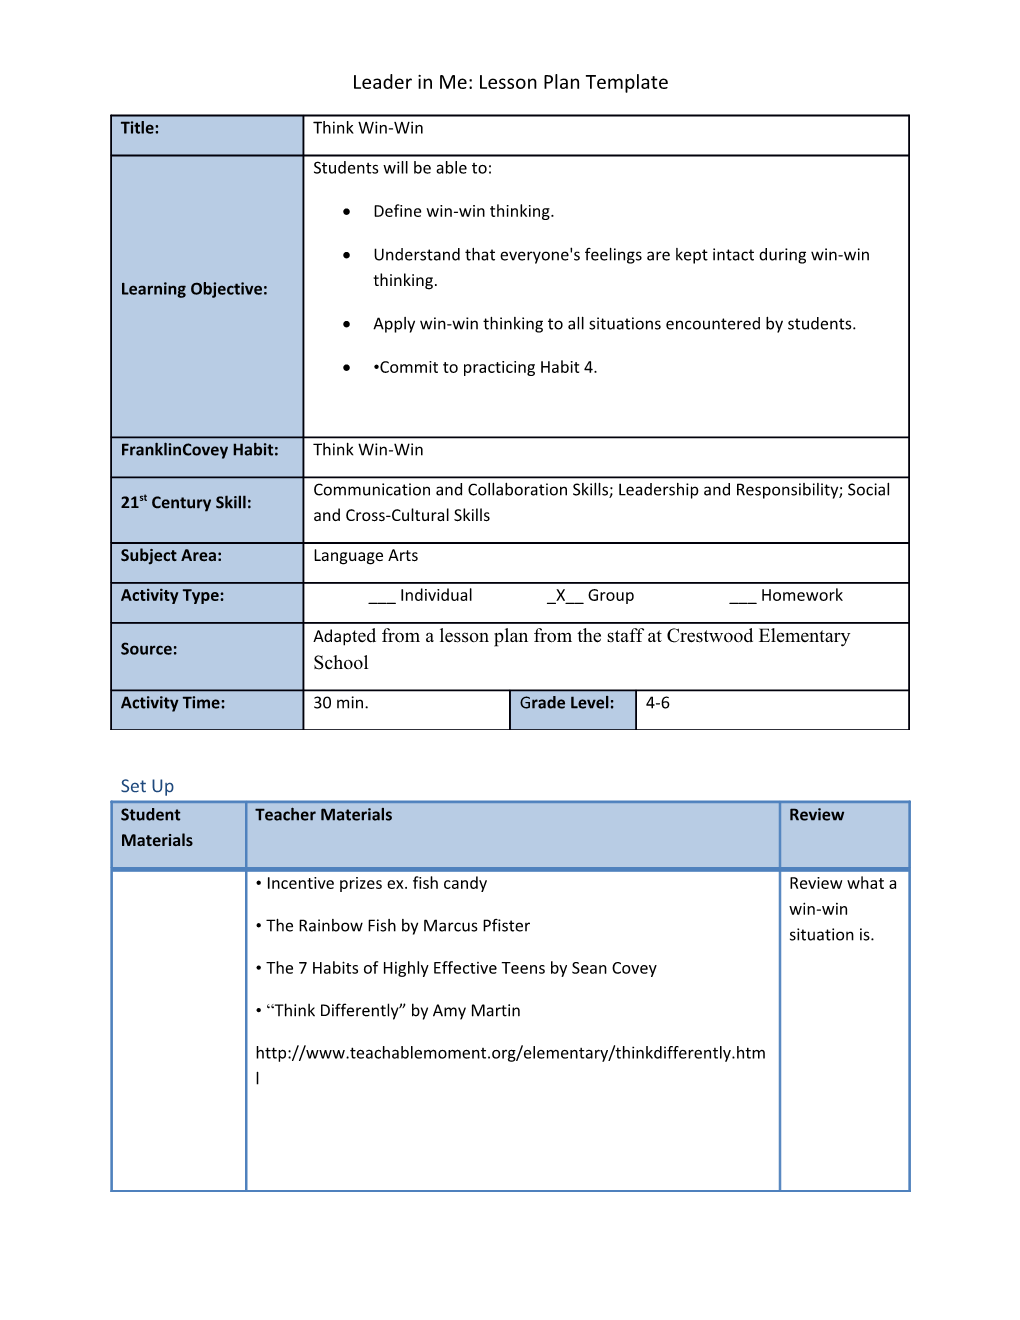 Leader In Me: Lesson Plan Template